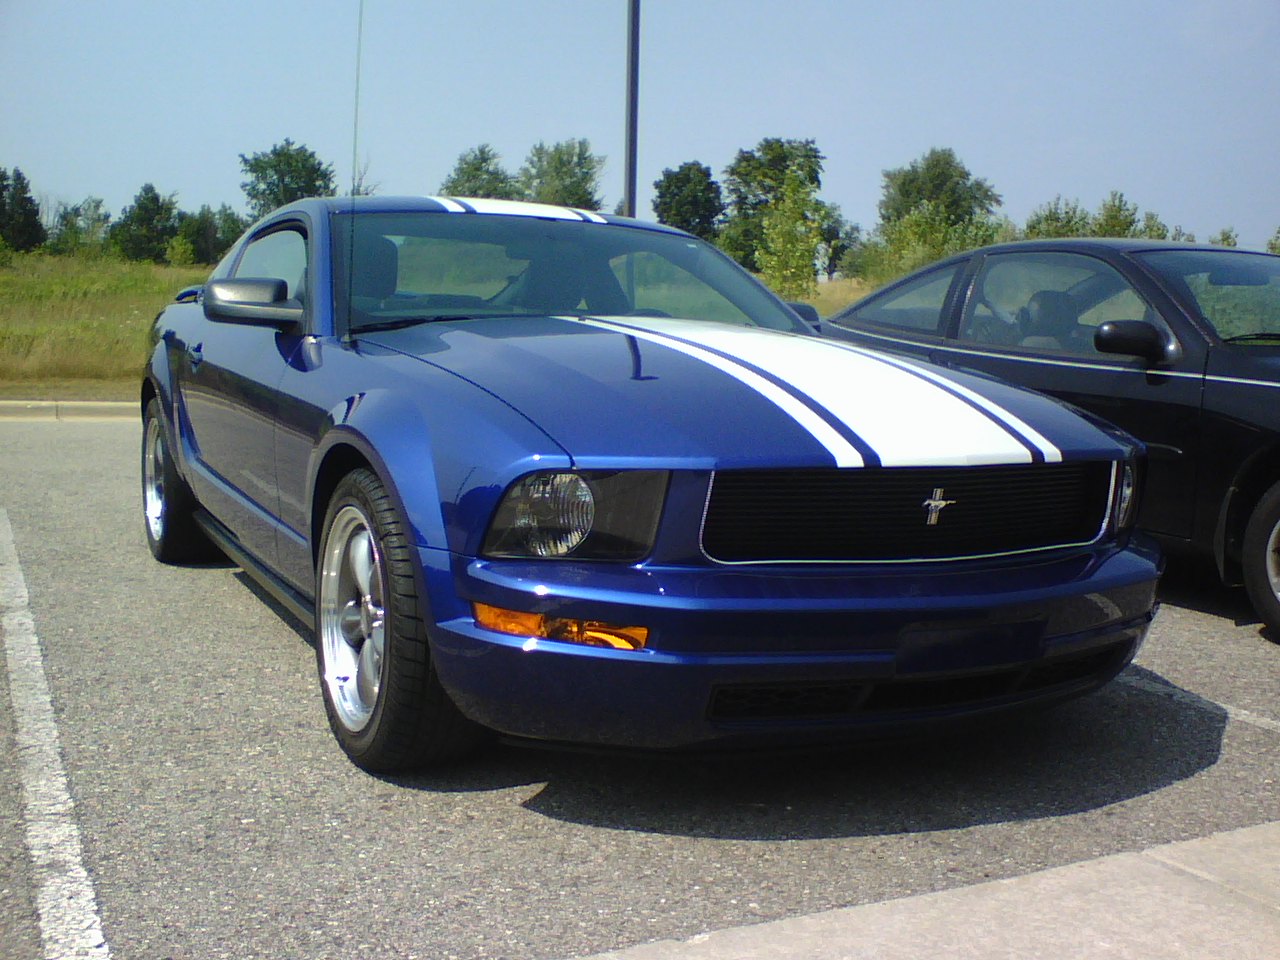 2005 Ford mustang quarter mile times #10